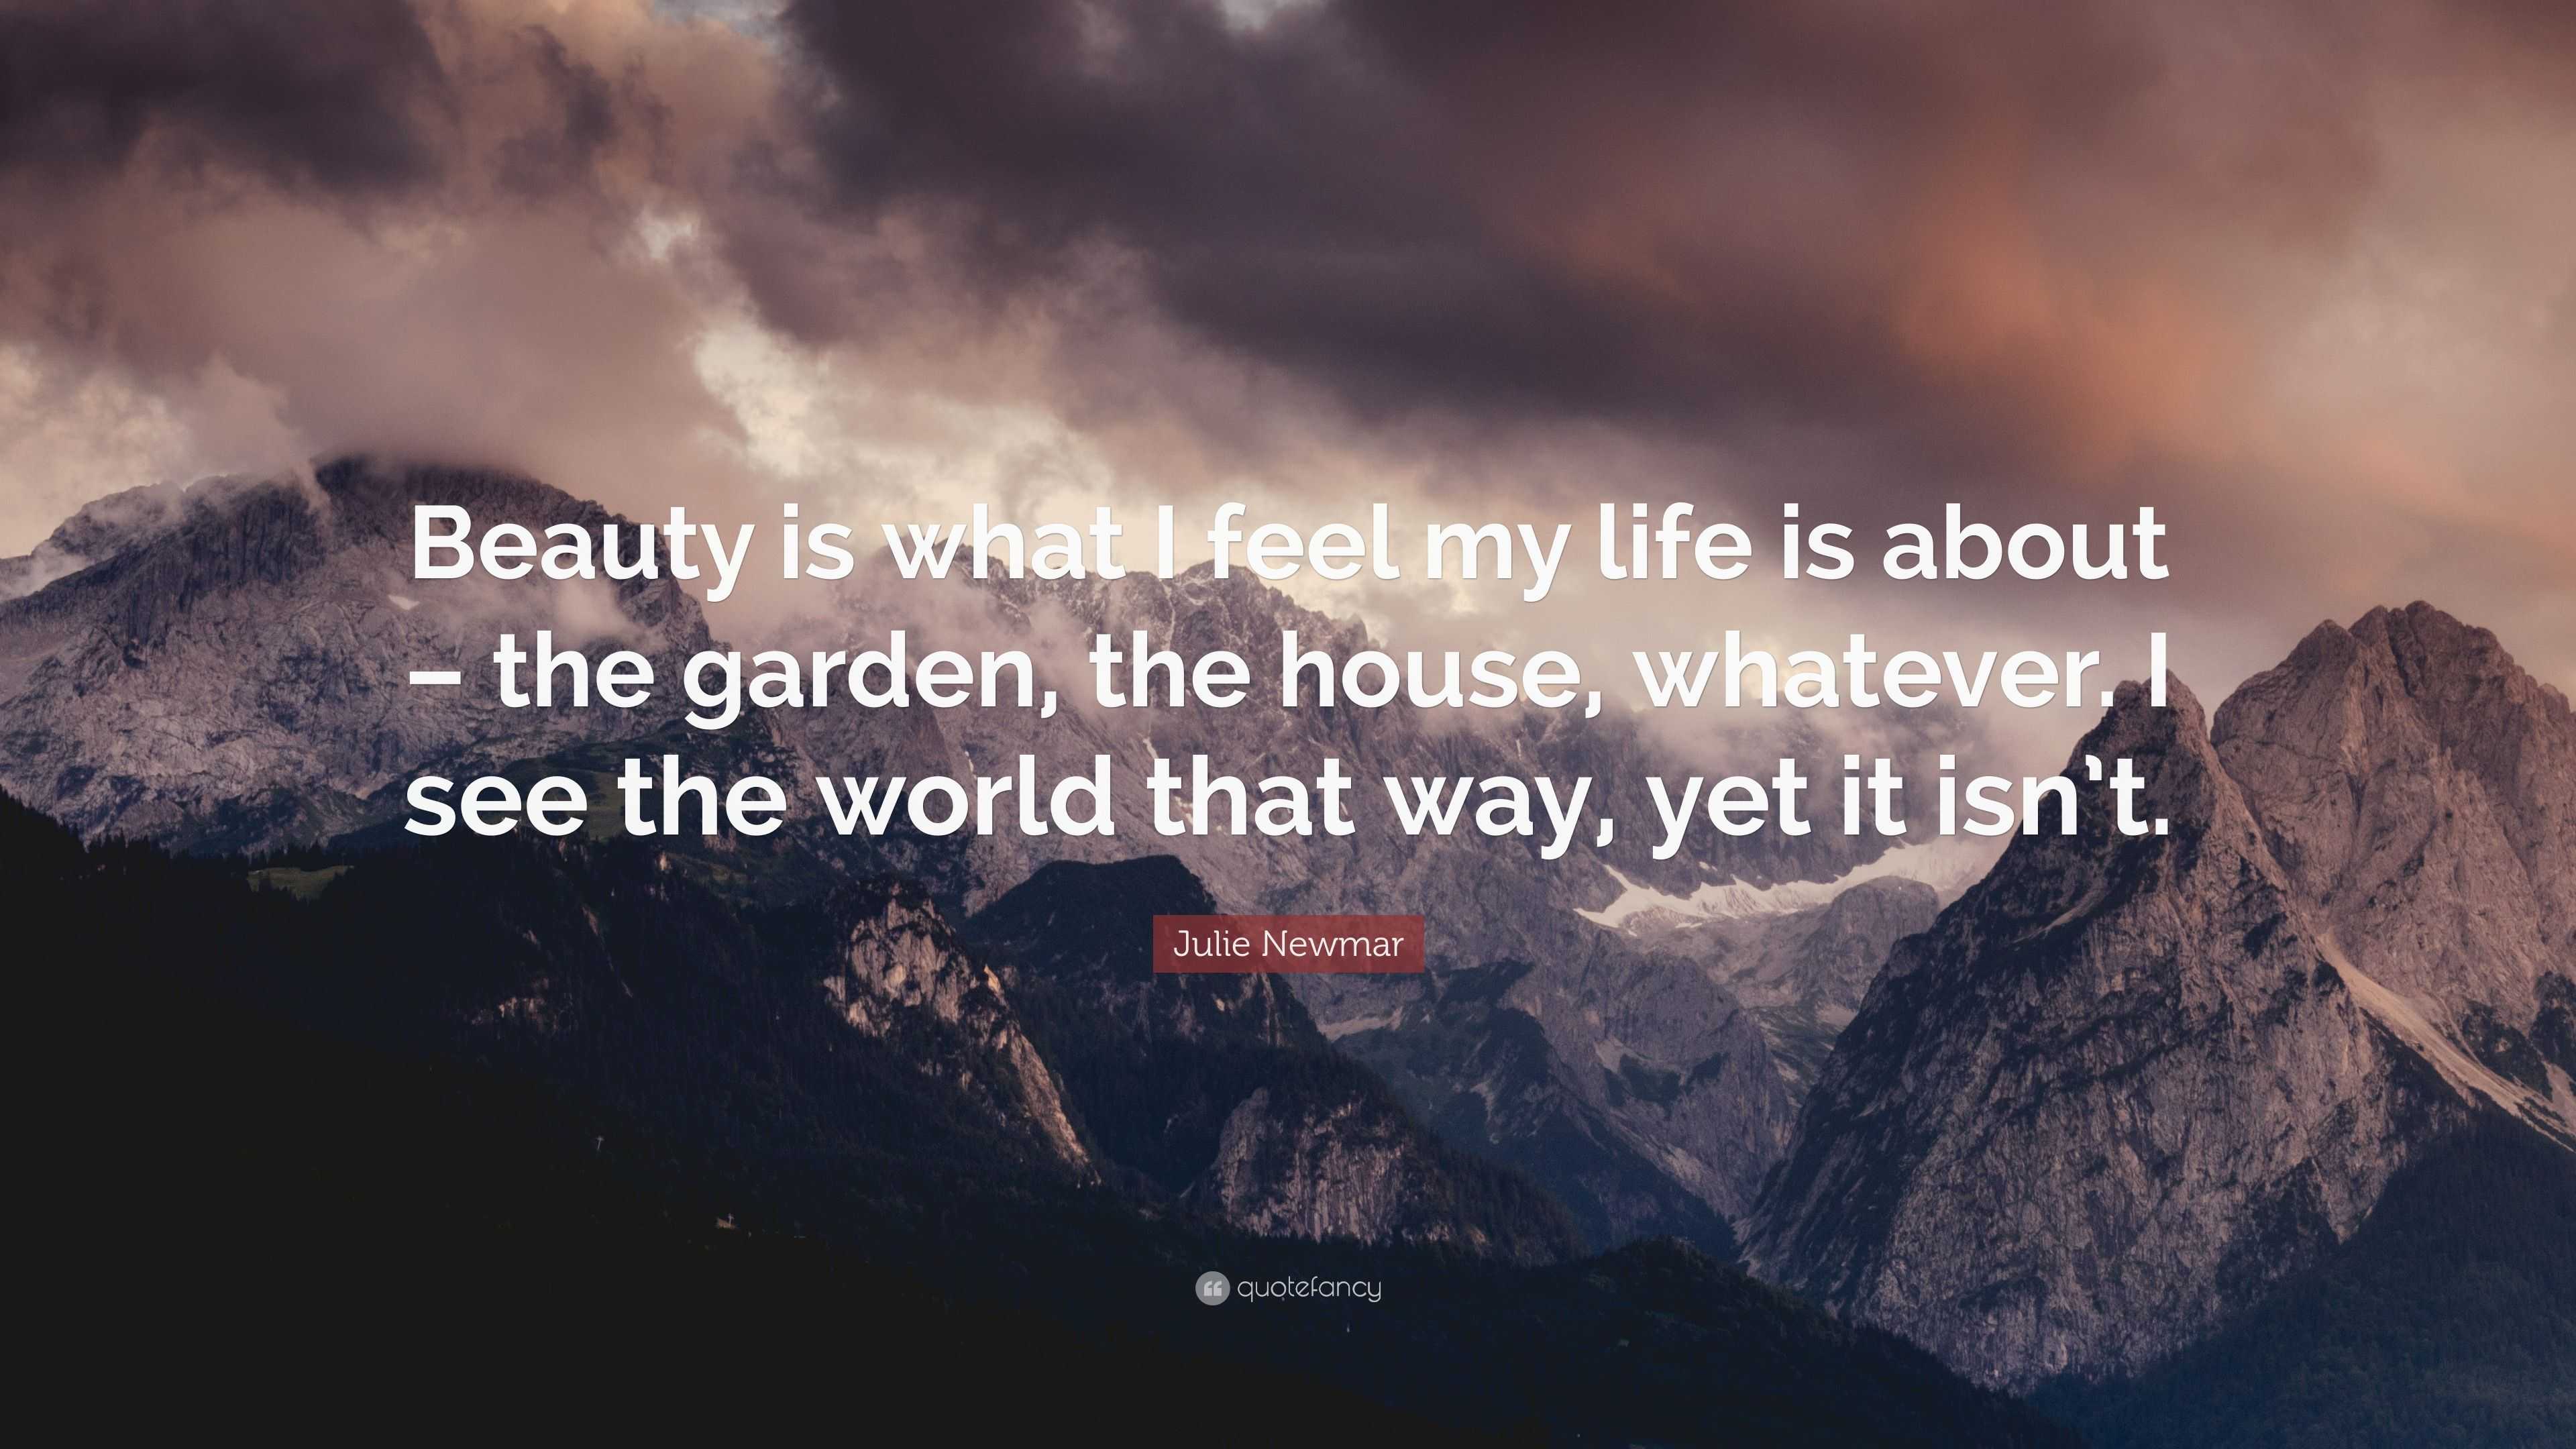 Julie Newmar Quote: “Beauty is what I feel my life is about – the ...